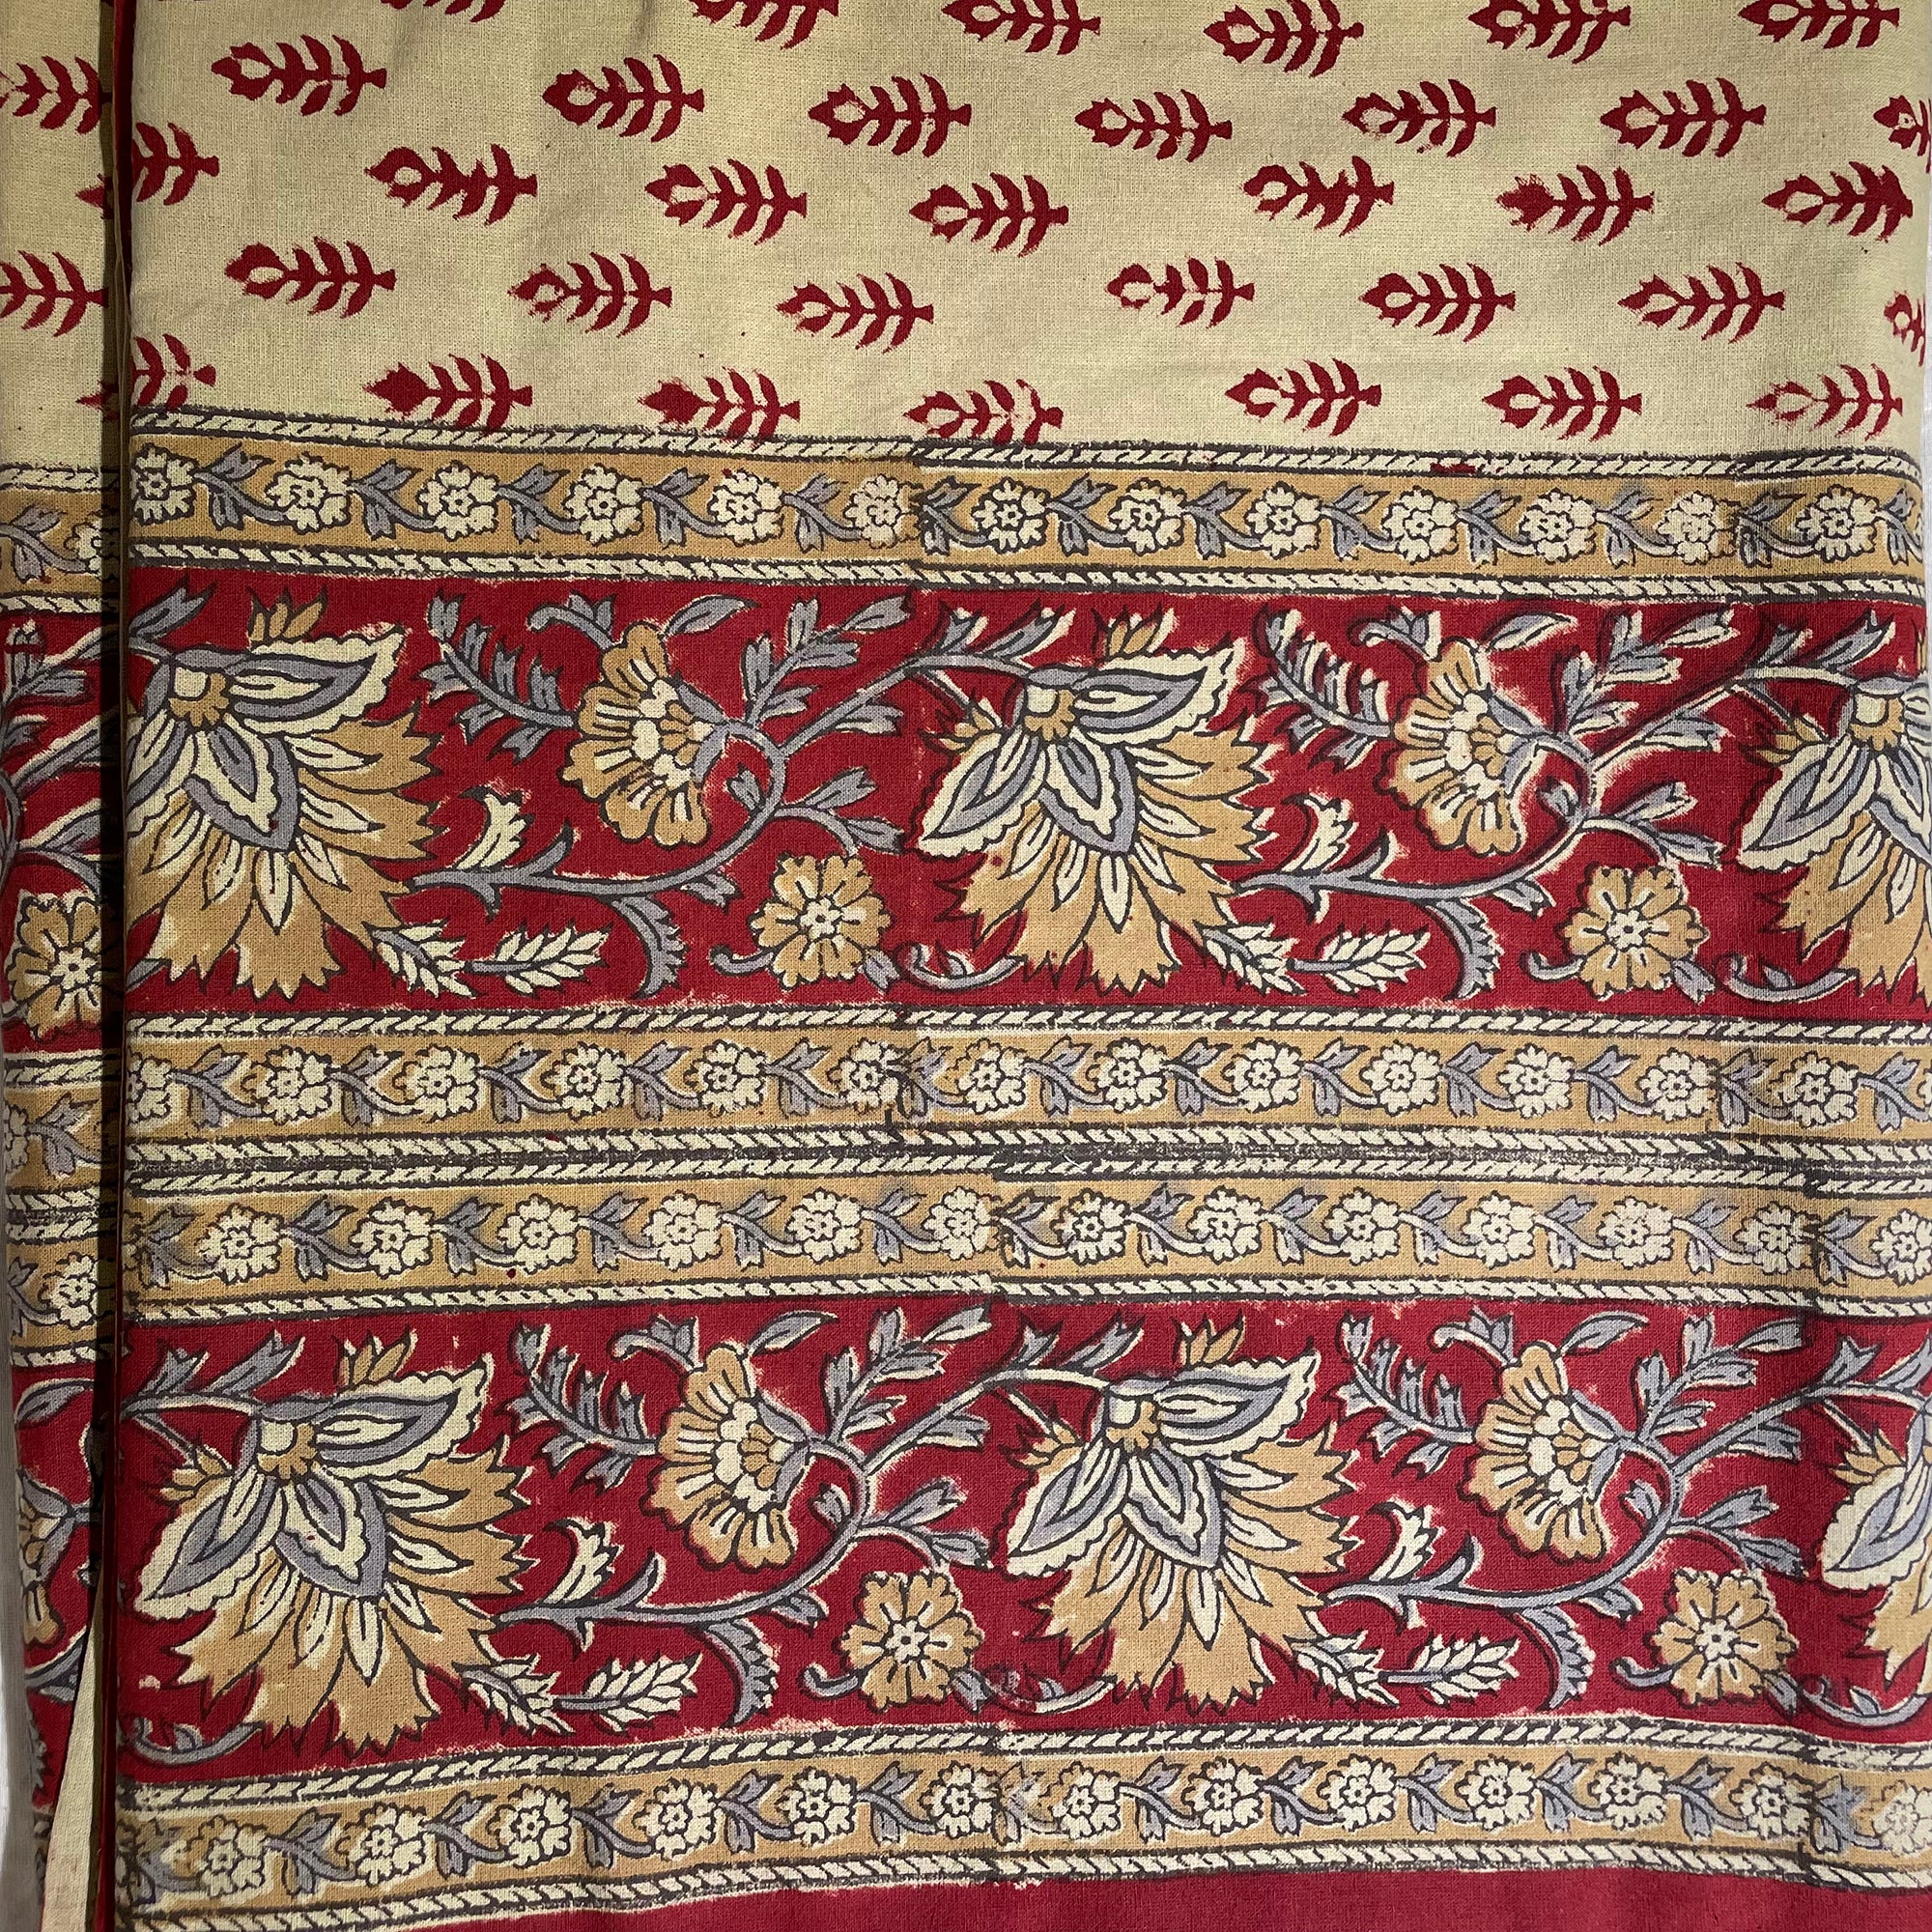 AR Blockprint Tablecloth with 12 Napkins-Red & Tan - Vintage India NYC